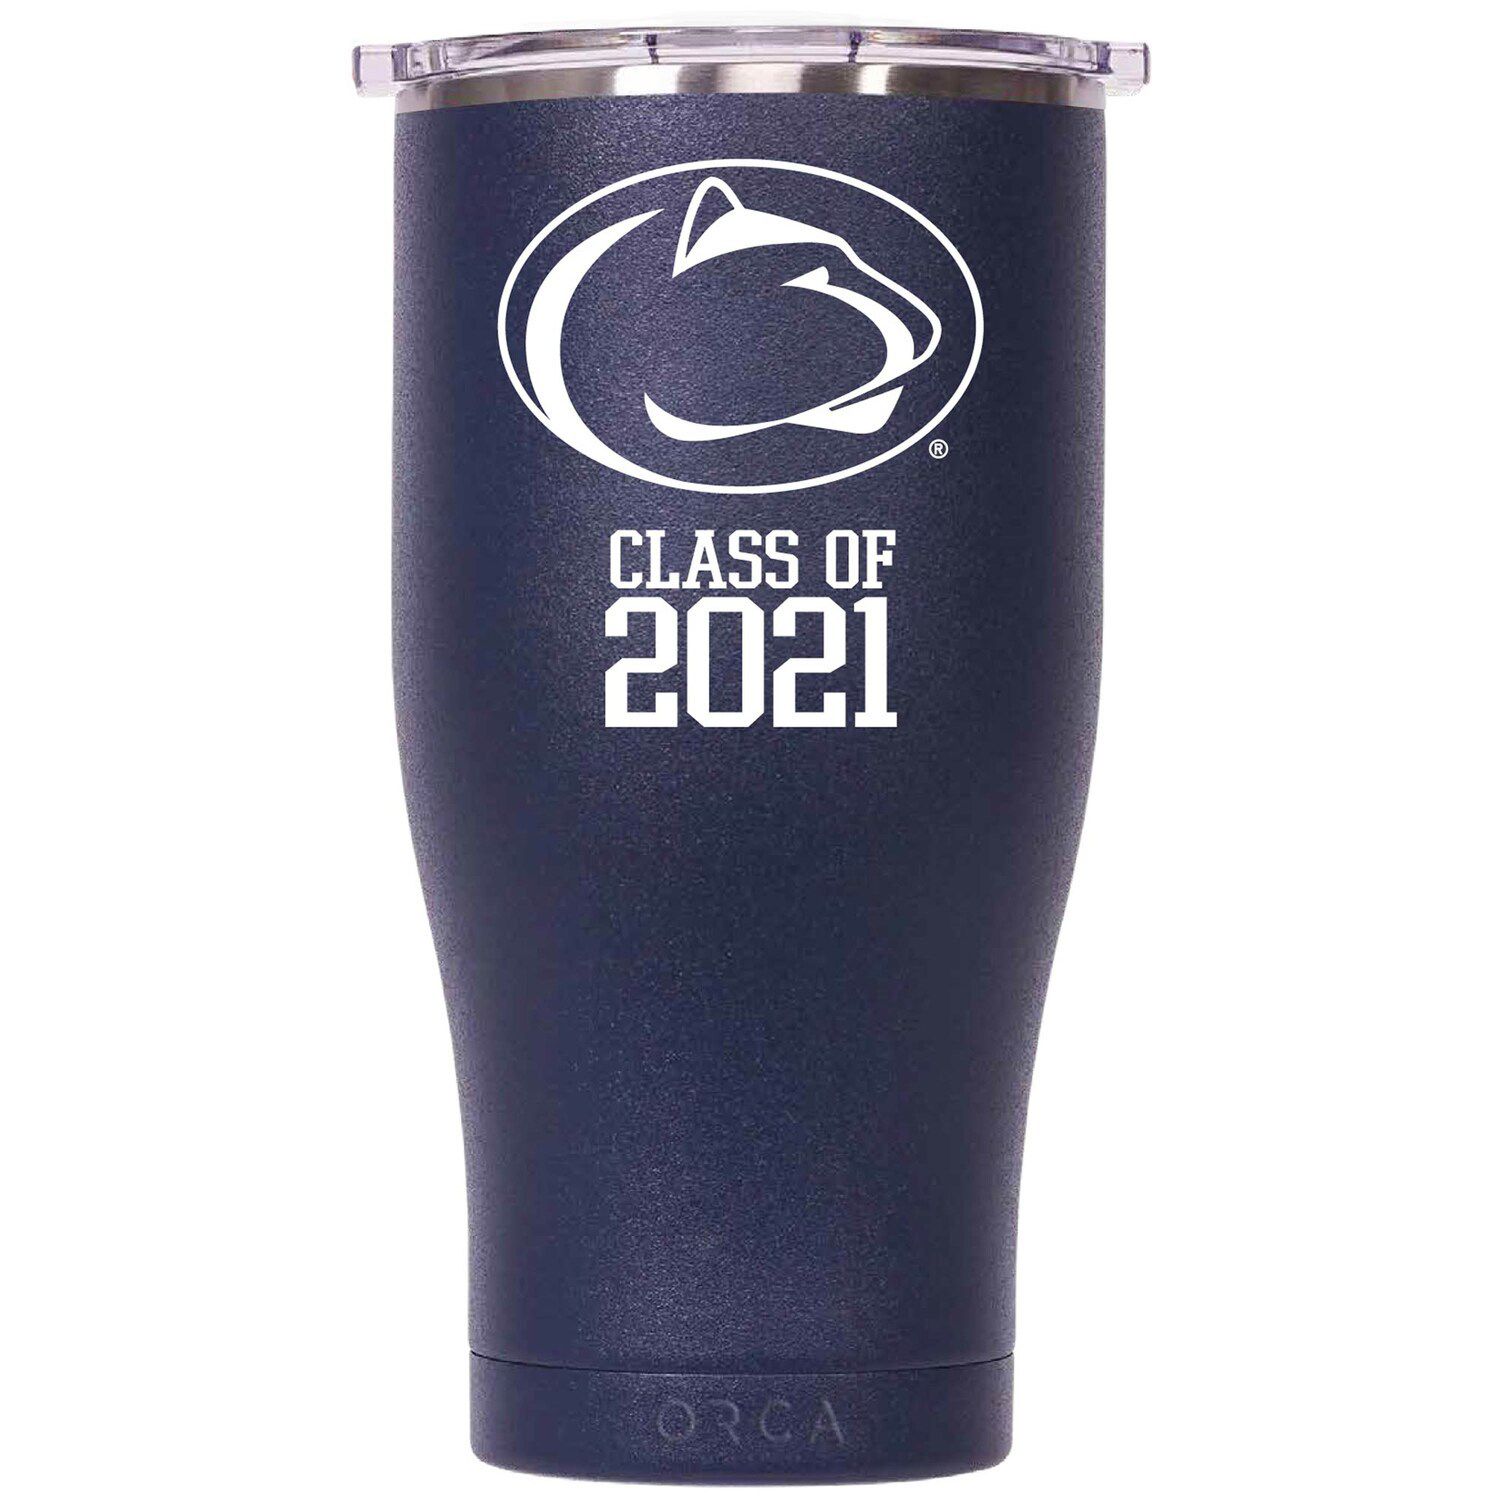 Image for Unbranded ORCA Penn State Nittany Lions 27oz. Class of 2021 Chaser Tumbler at Kohl's.